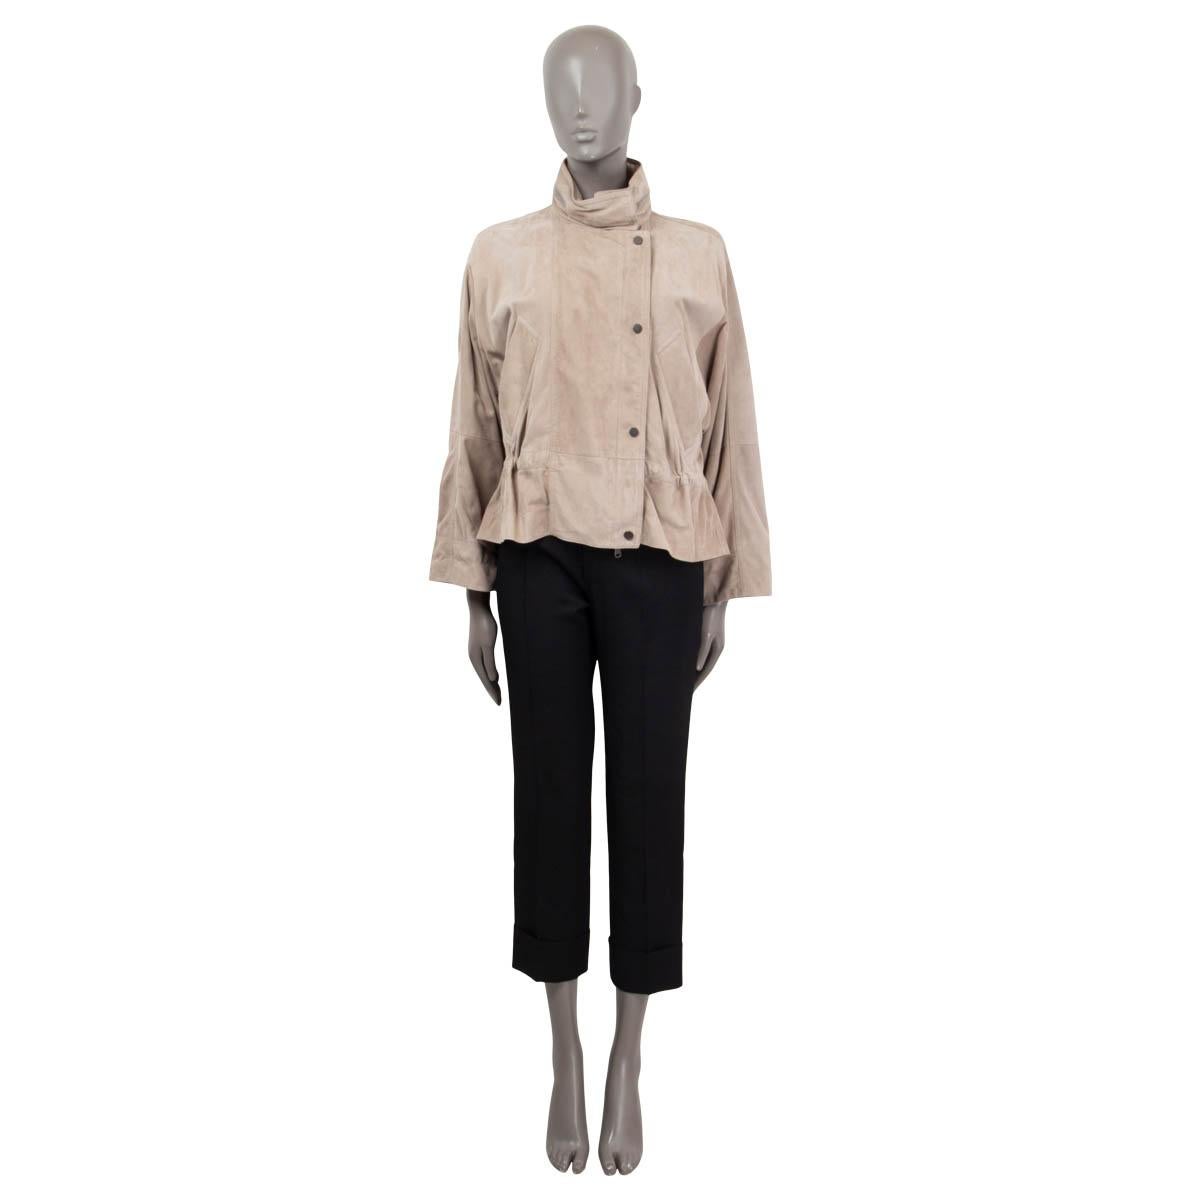 100% authentic Brunello Cucinelli oversized stand collar jacket in light taupe suede (100%). Features Monili striped details along the collar, a hidden hood, two buttoned slit pockets and long raglan sleeves (sleeve measurements taken from the